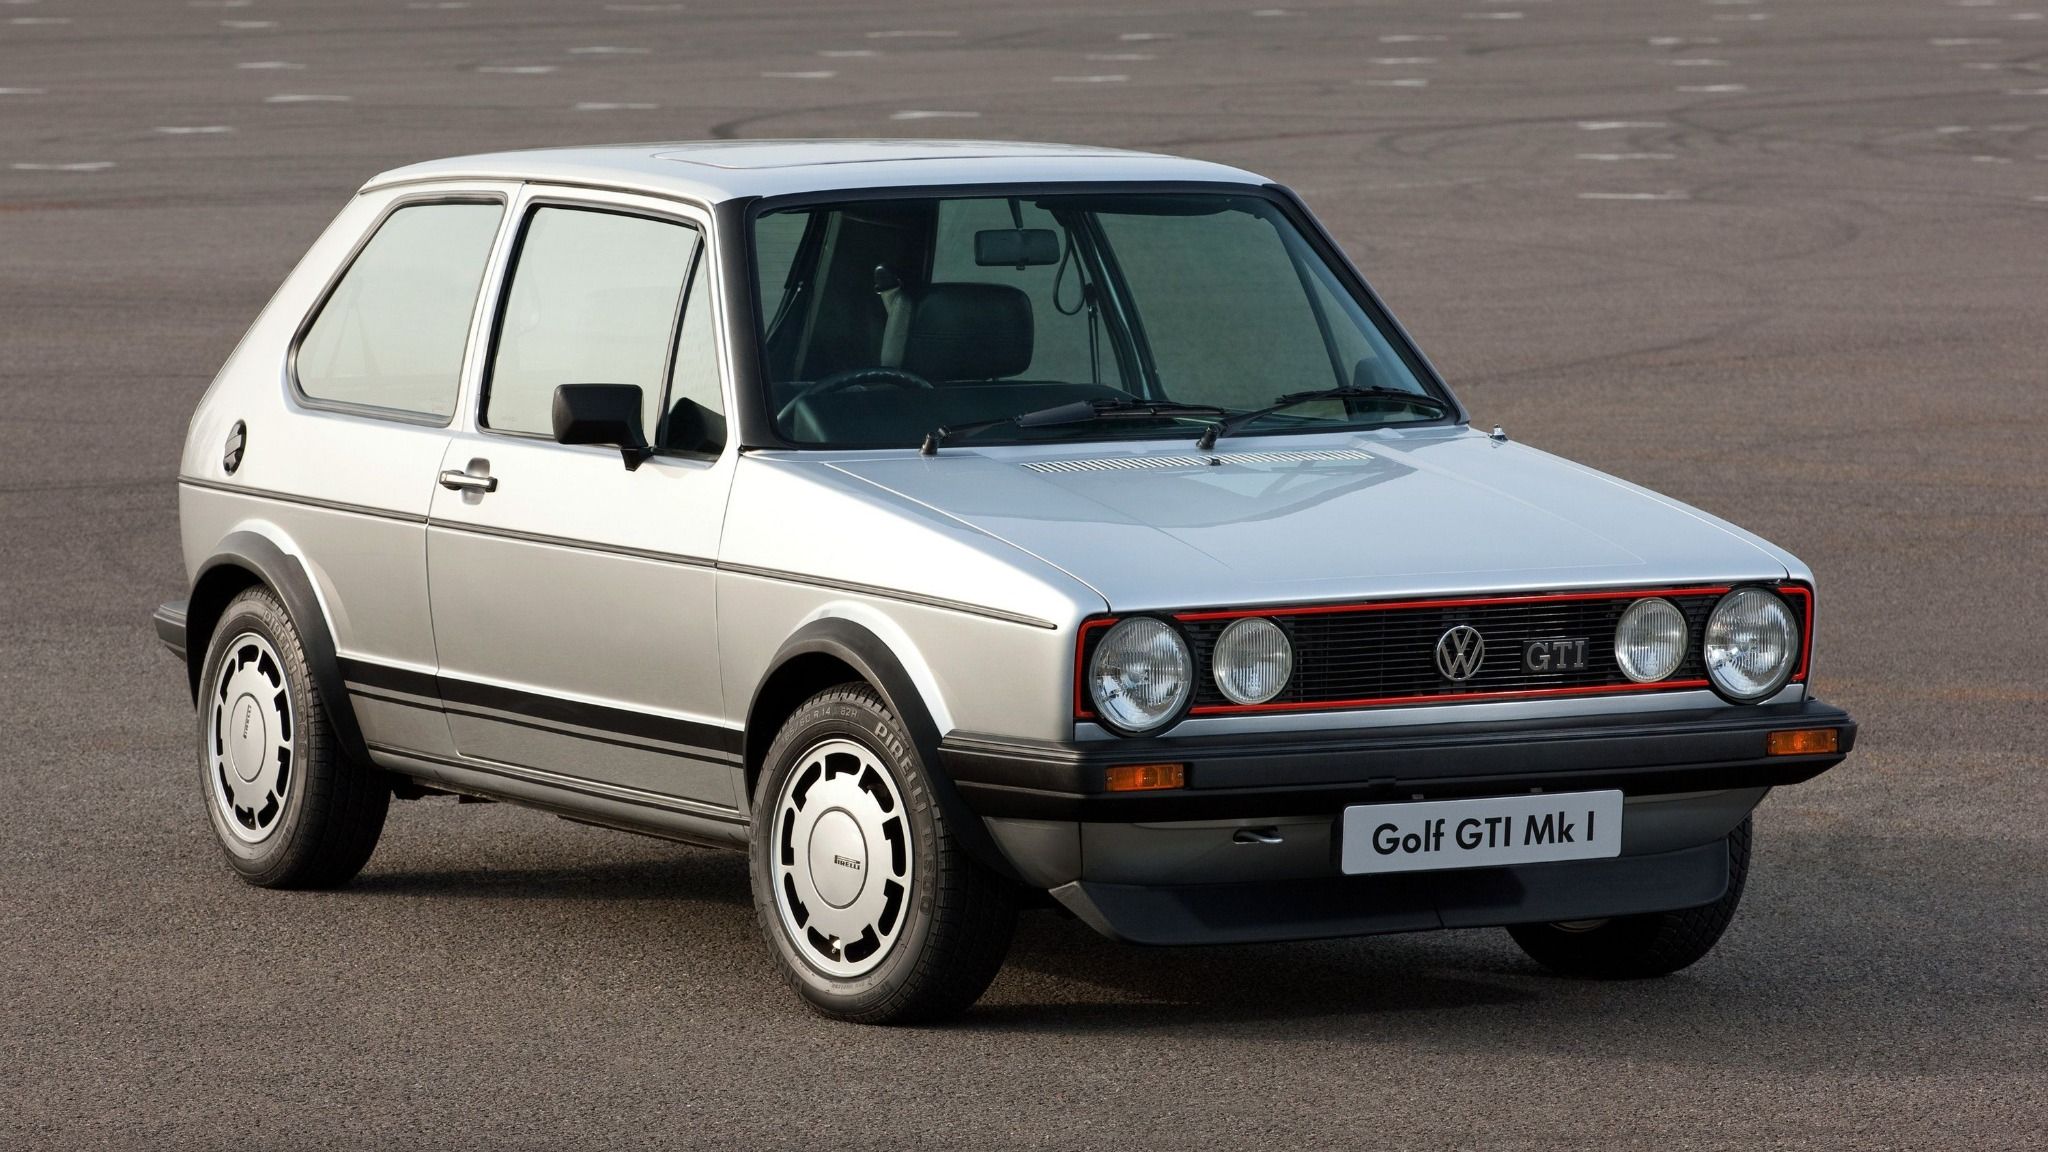 Front view of a silver VW Golf GTI MkI